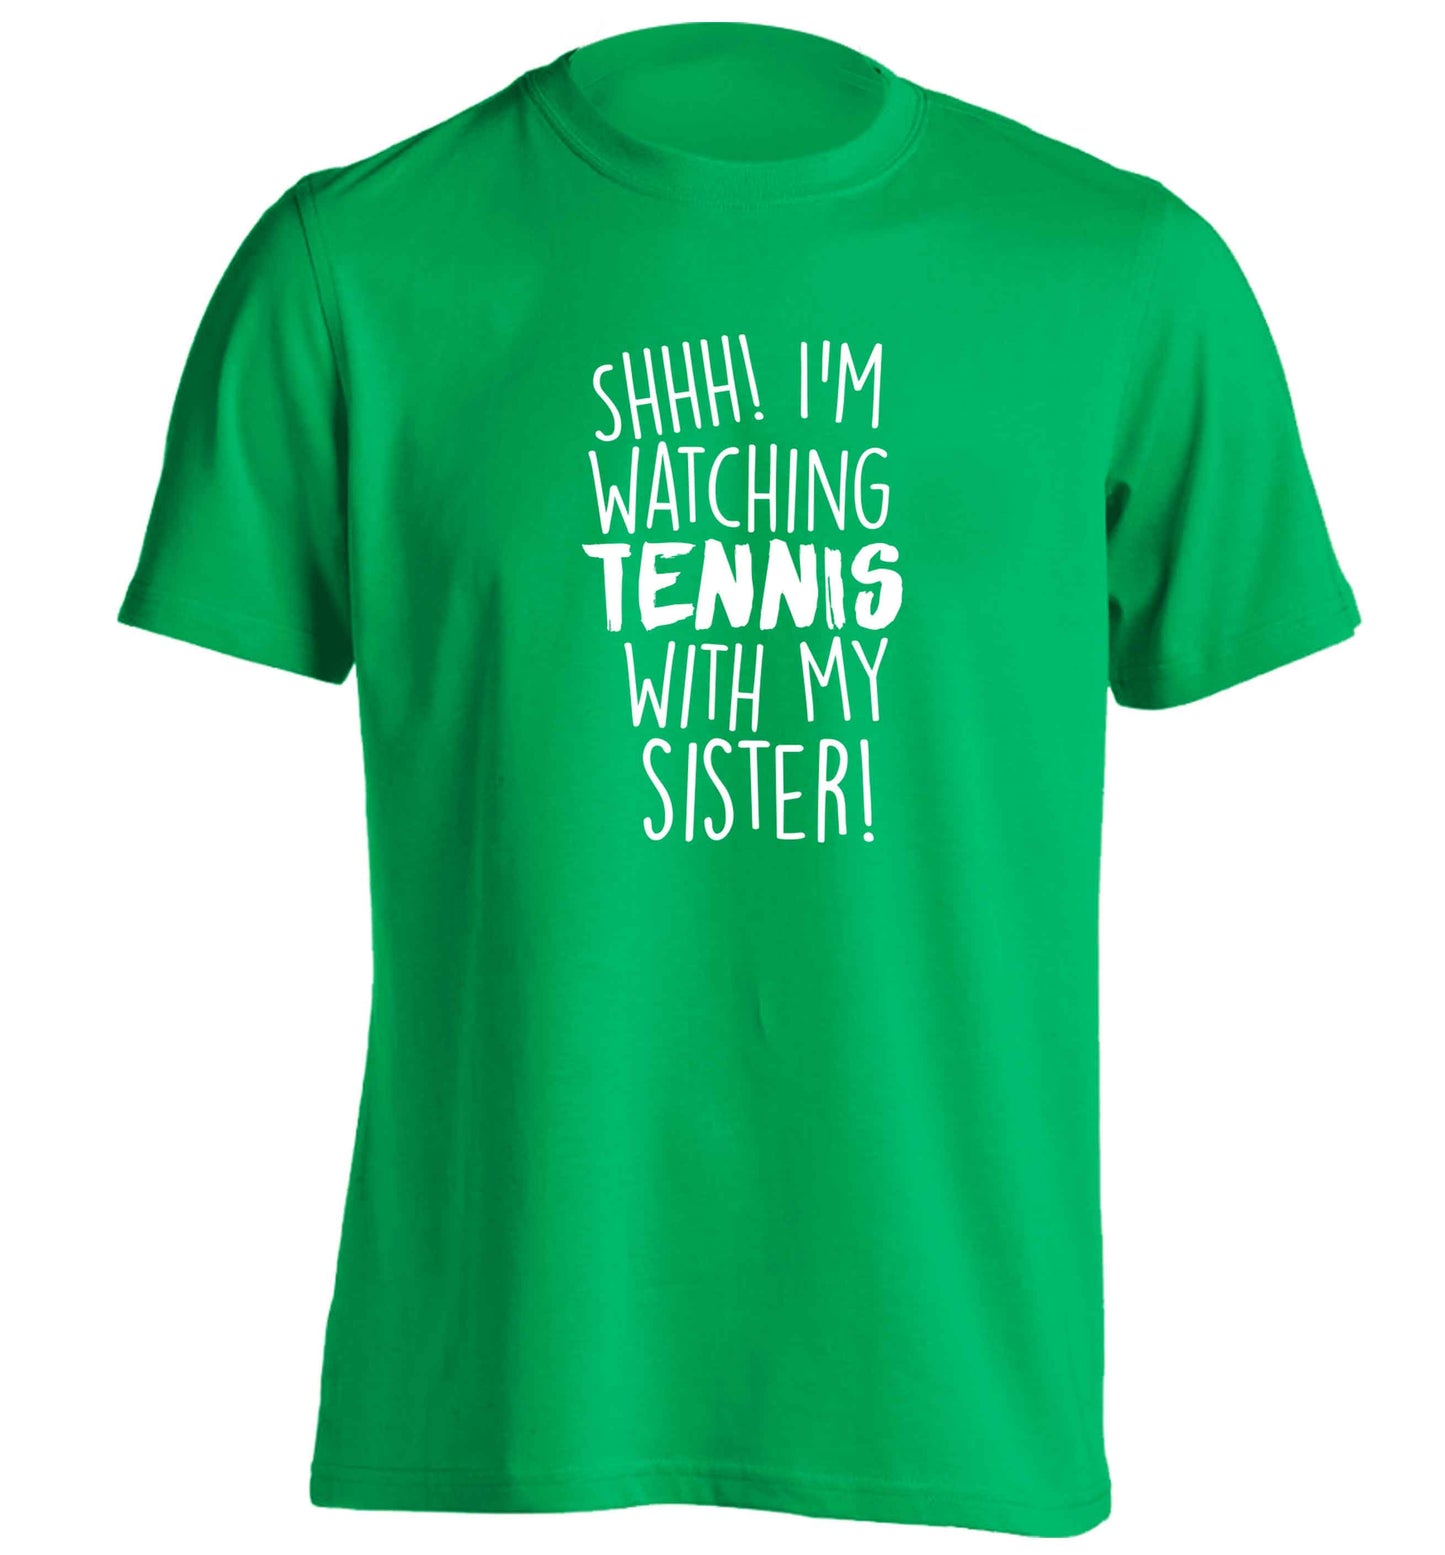 Shh! I'm watching tennis with my sister! adults unisex green Tshirt 2XL